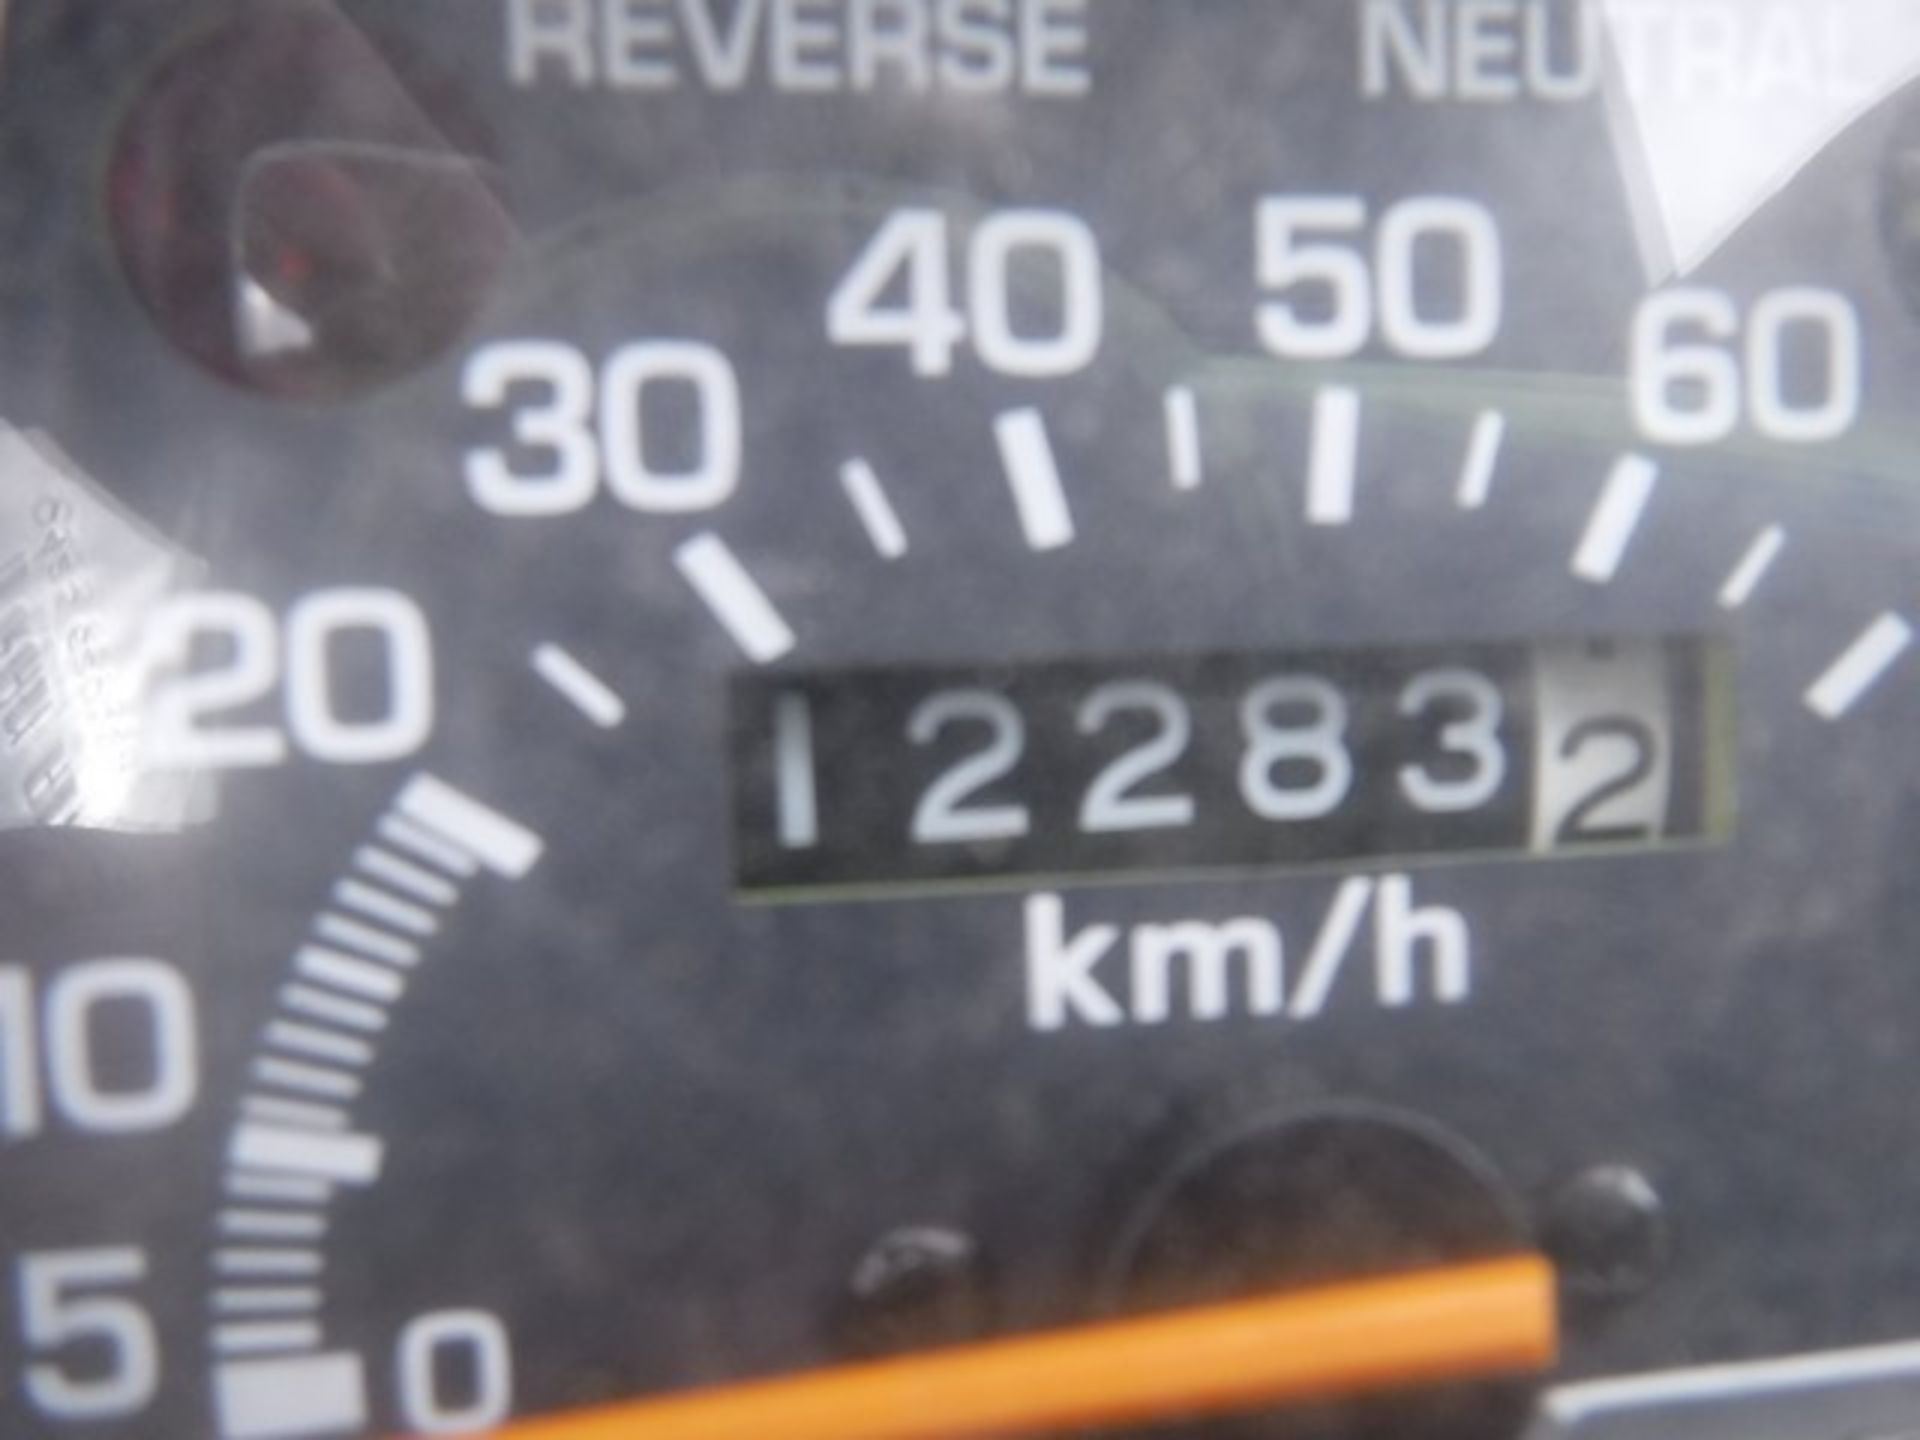 YAMAHA GRIZZLY 2WD QUAD 2008, 12283 KM AND 626 HRS (NOT VERIFIED) - Image 6 of 7